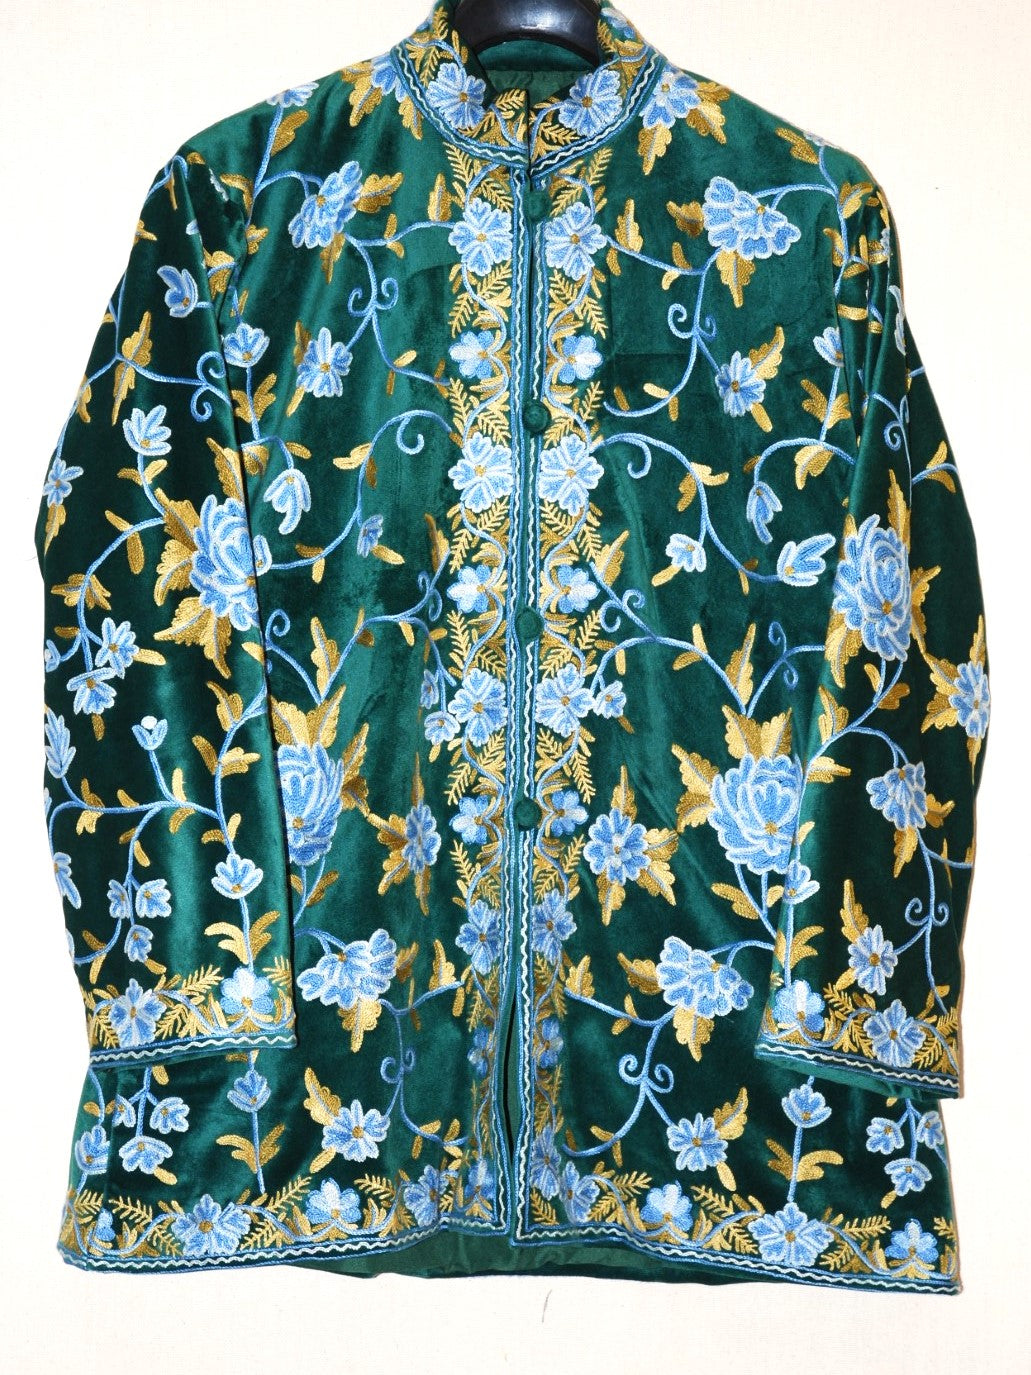 Embroidered Velvet Jacket Green, Blue Green Embroidery #AO-712